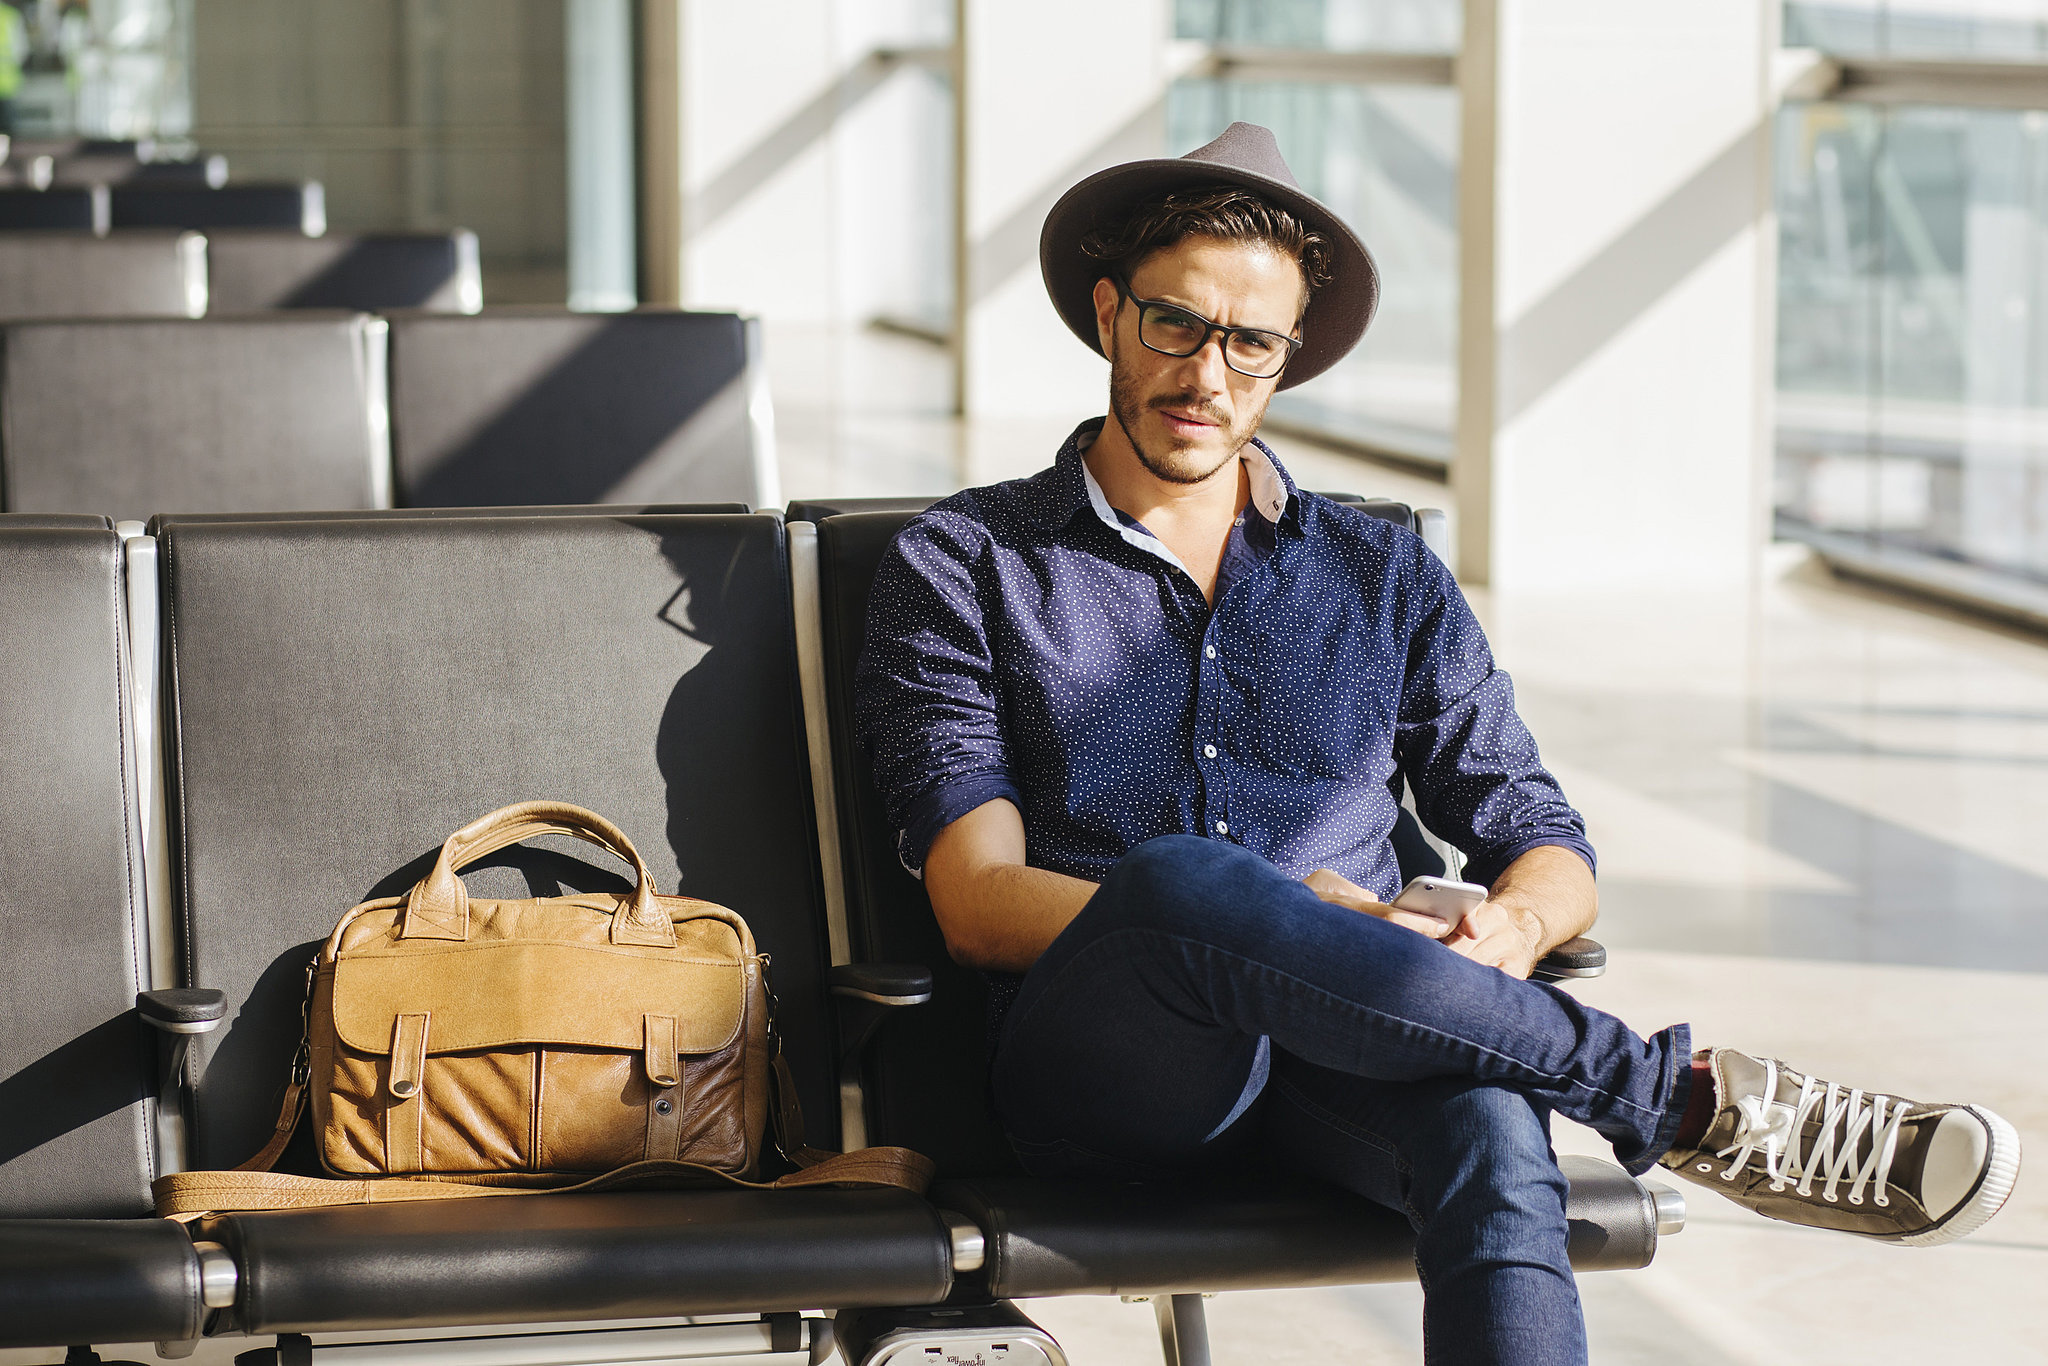 How To Look Cool and Trendy While Travelling